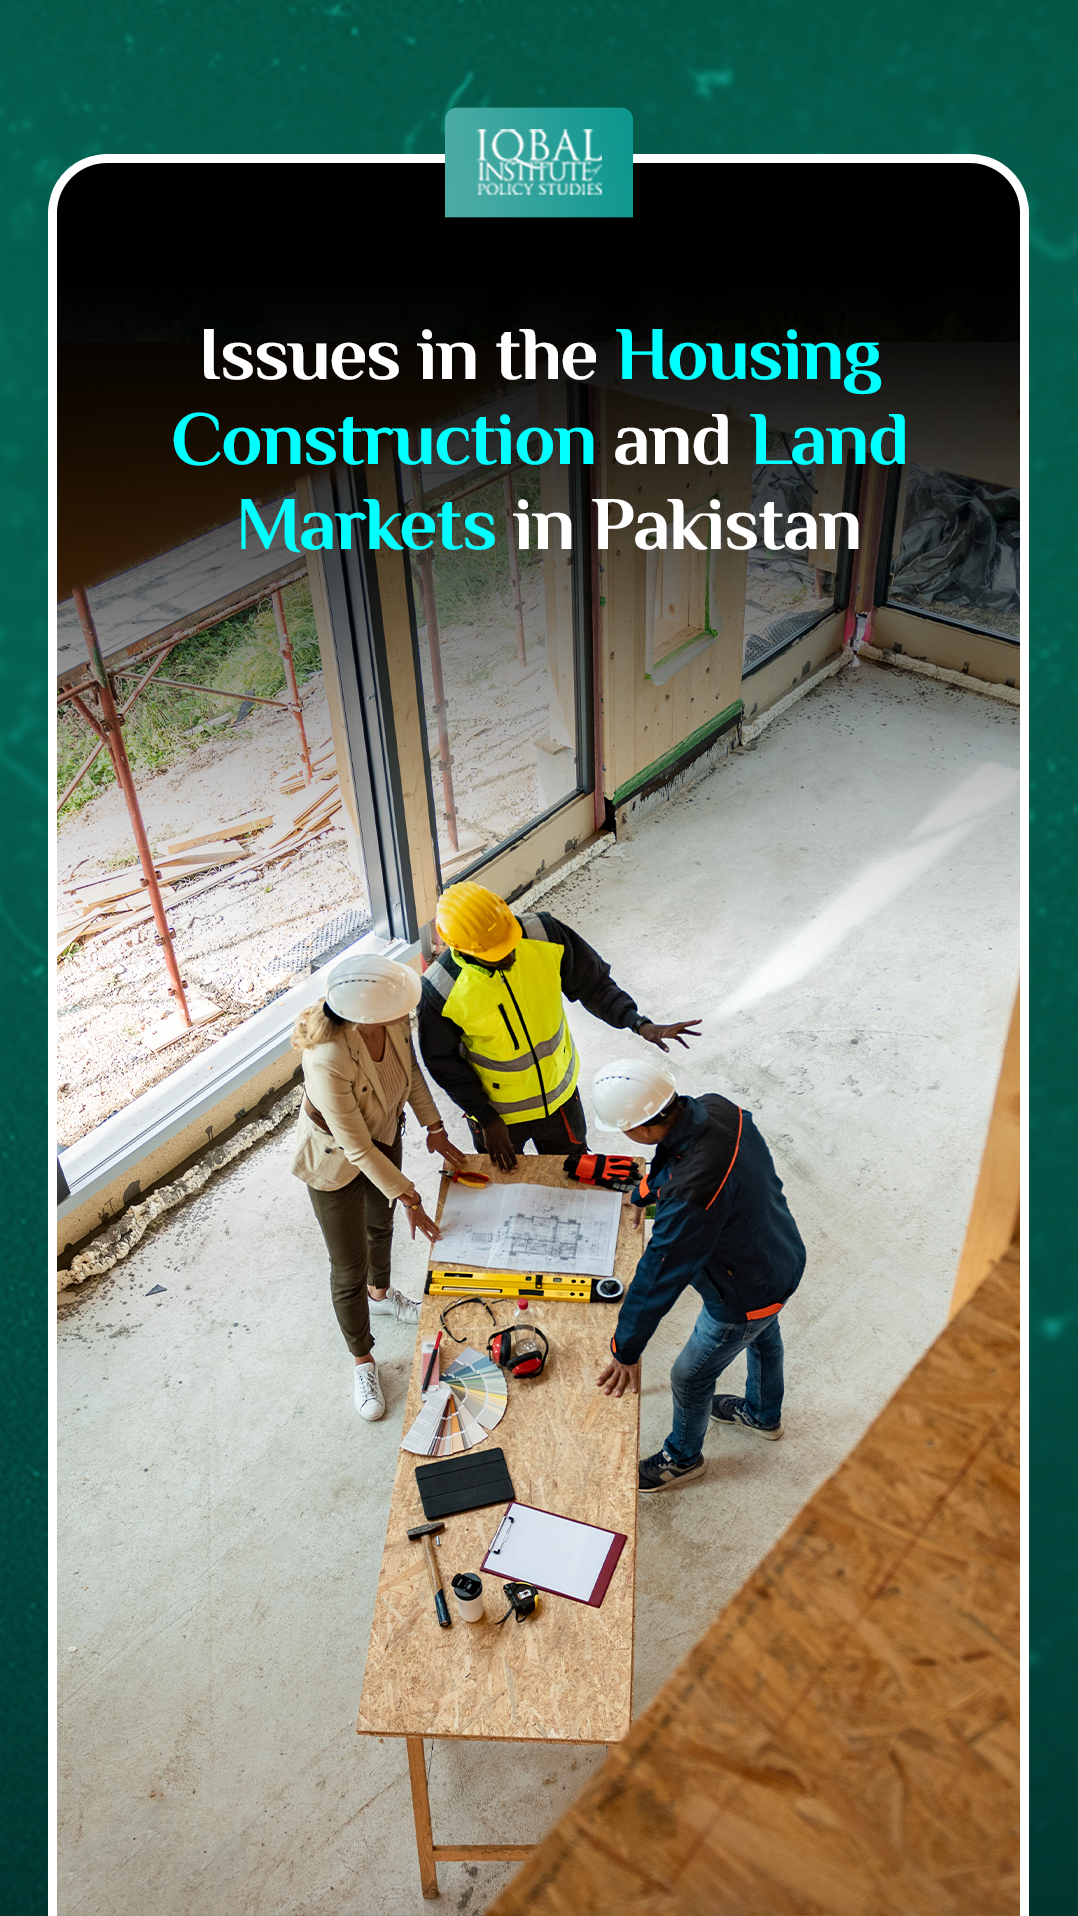 Issues in the Housing Construction and Land Markets in Pakistan